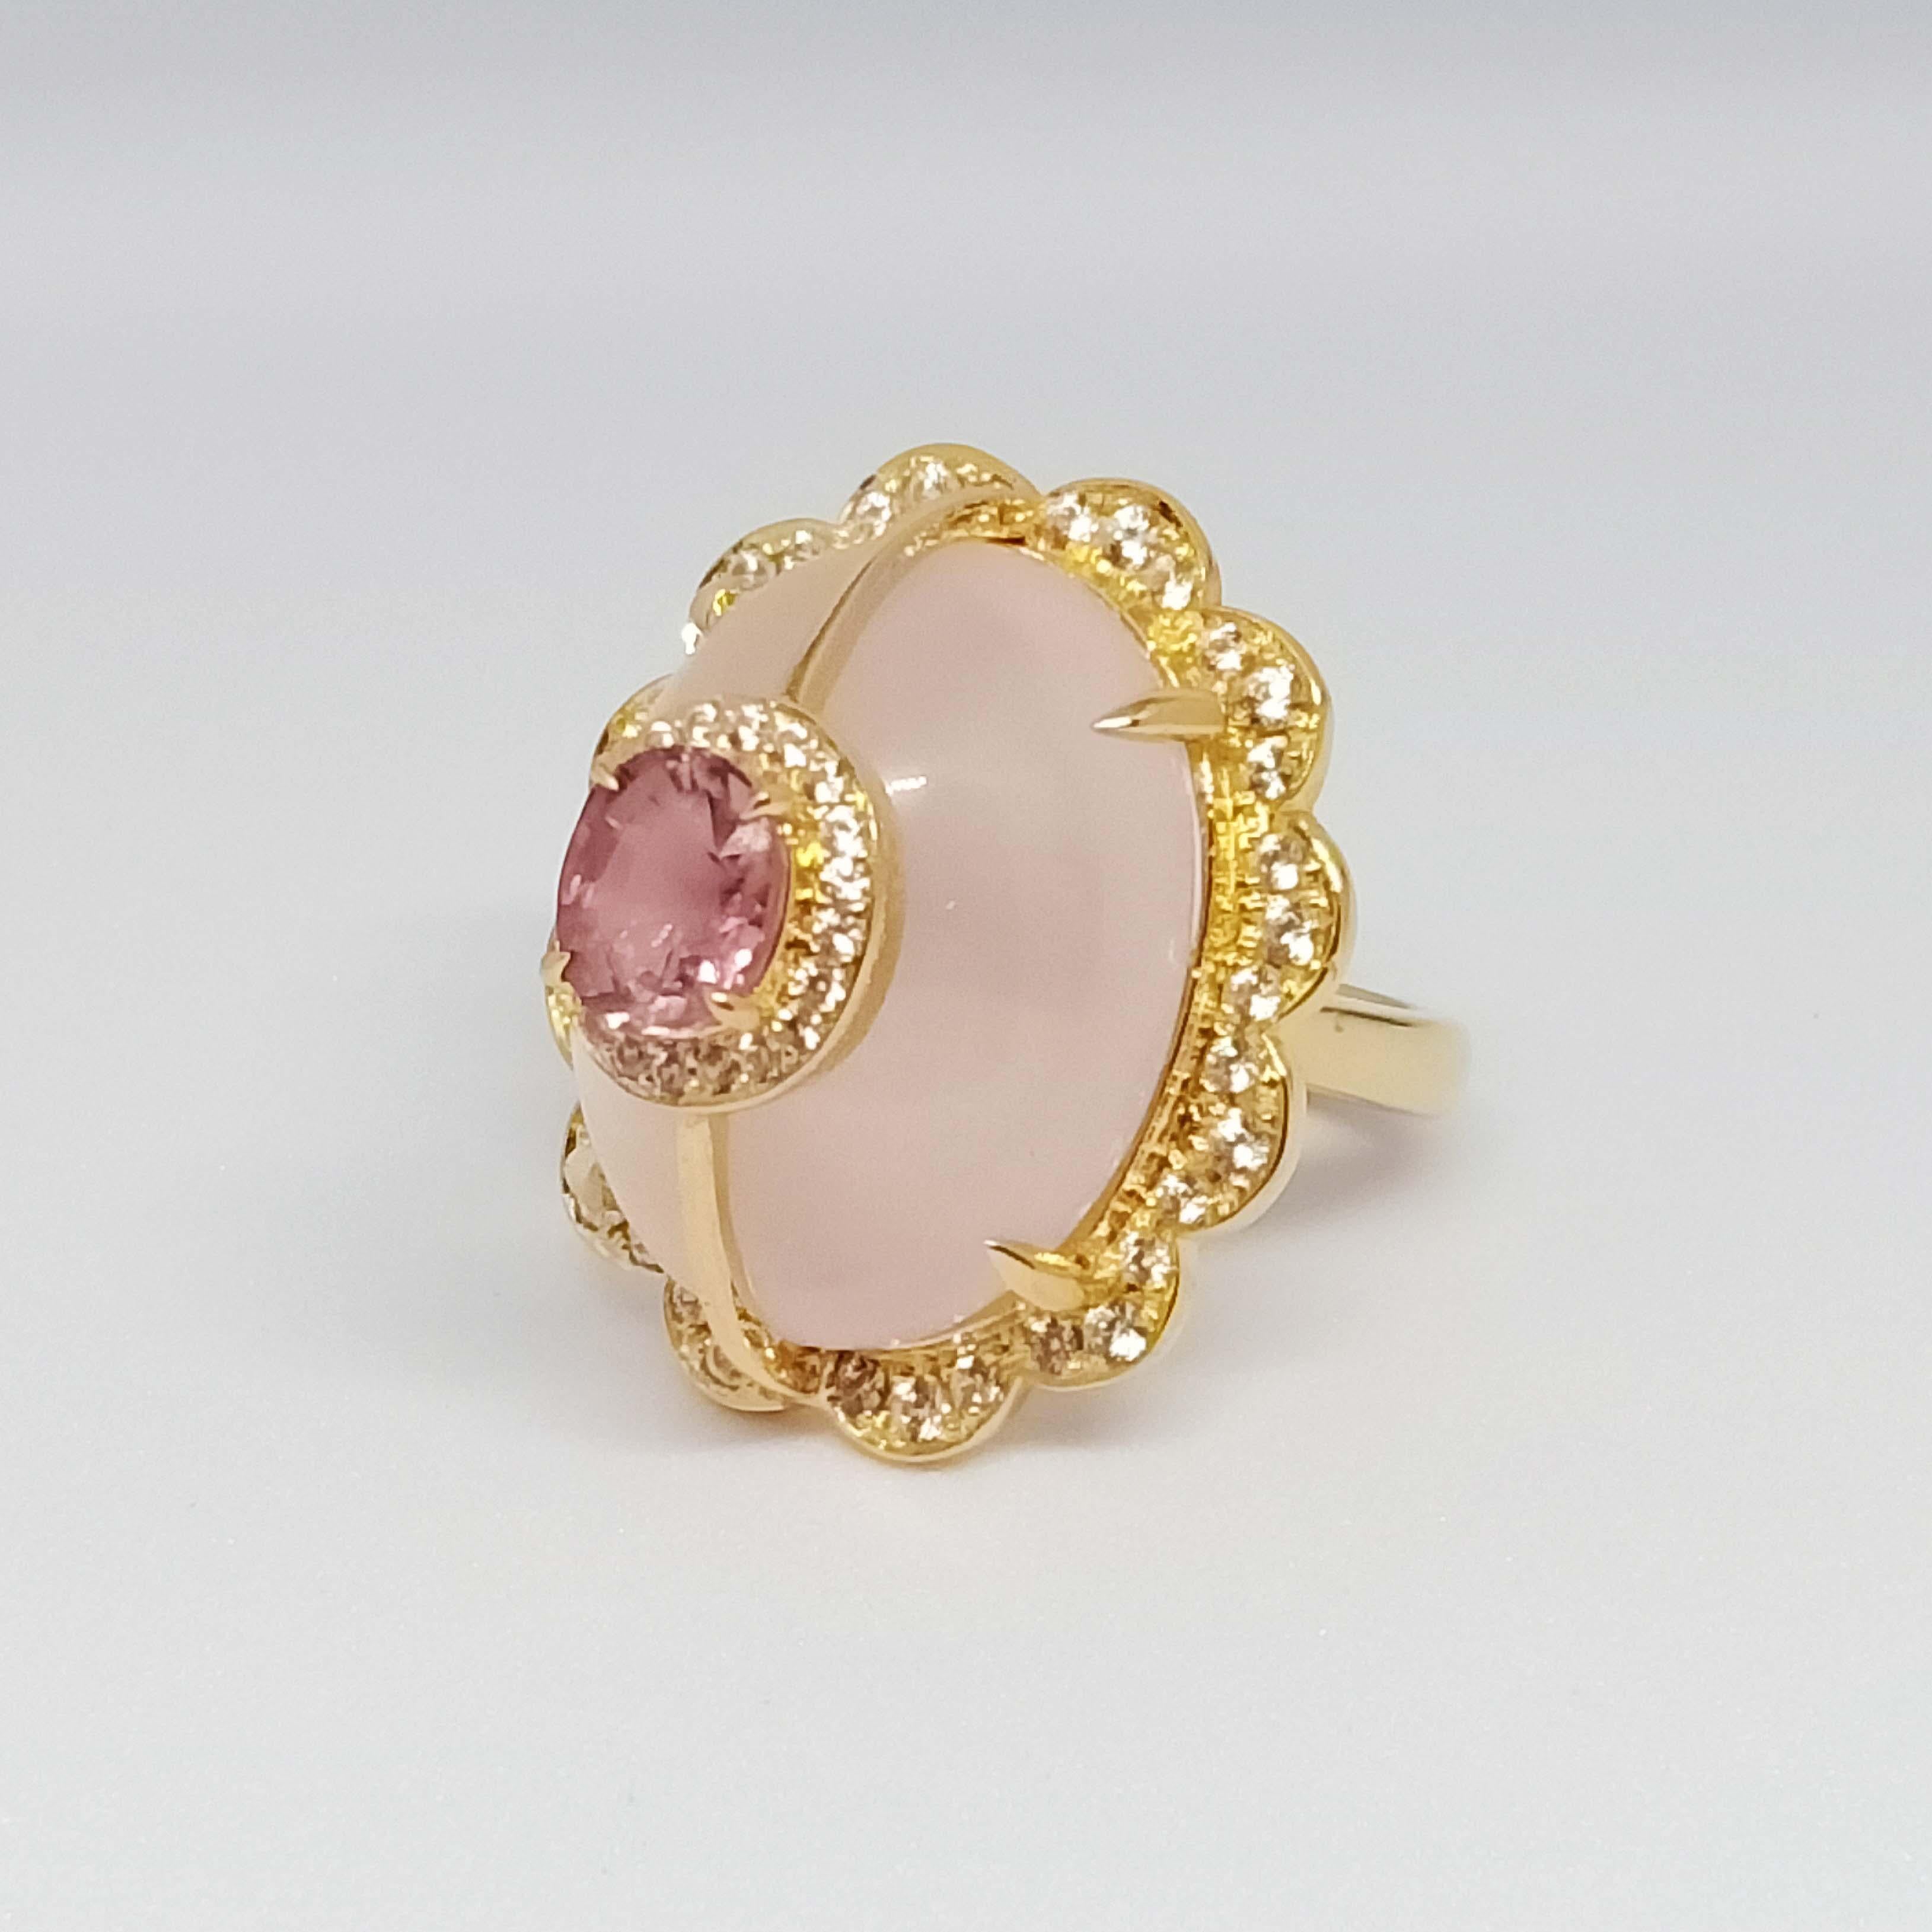 Art Nouveau 33.43 Cts. Rose Quartz Ring. Sterling Silver on 18K Gold Plated. For Sale